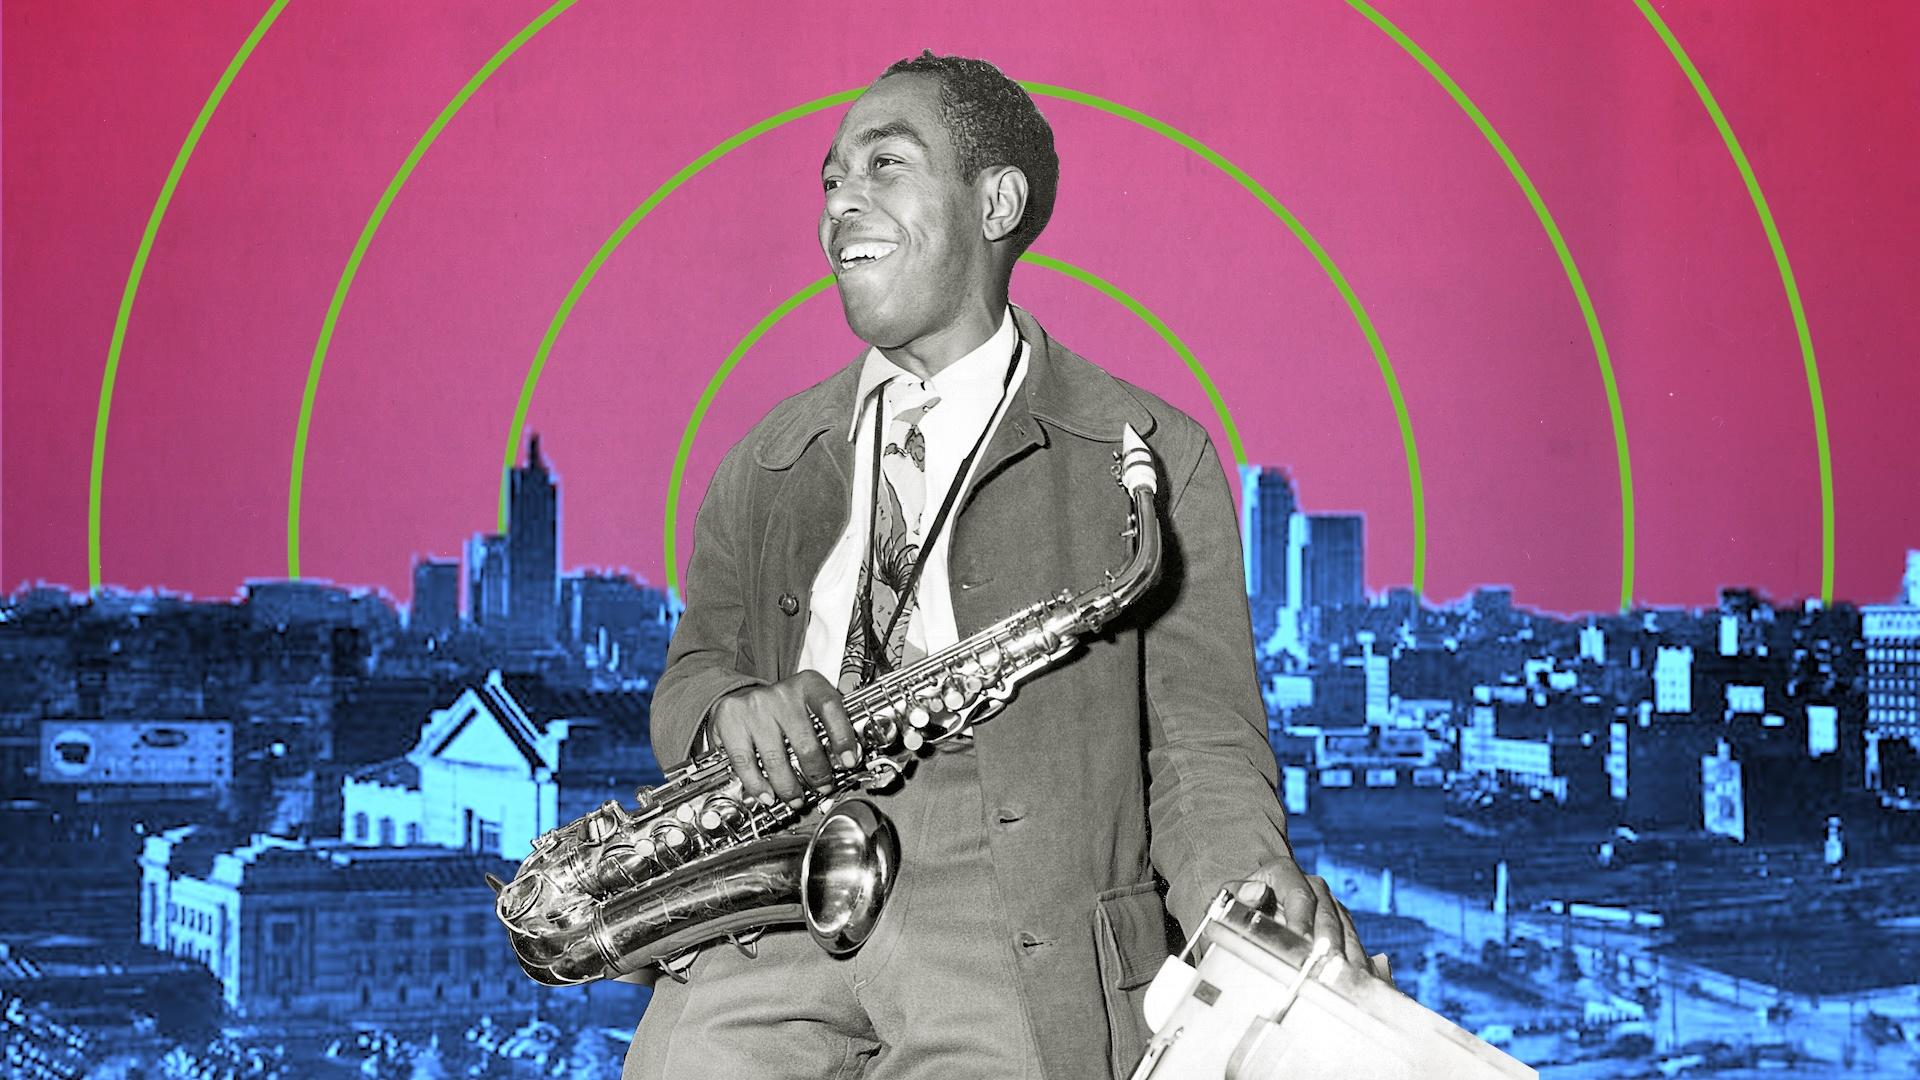 Kansas City's annual tribute to jazz icon Charlie Parker is